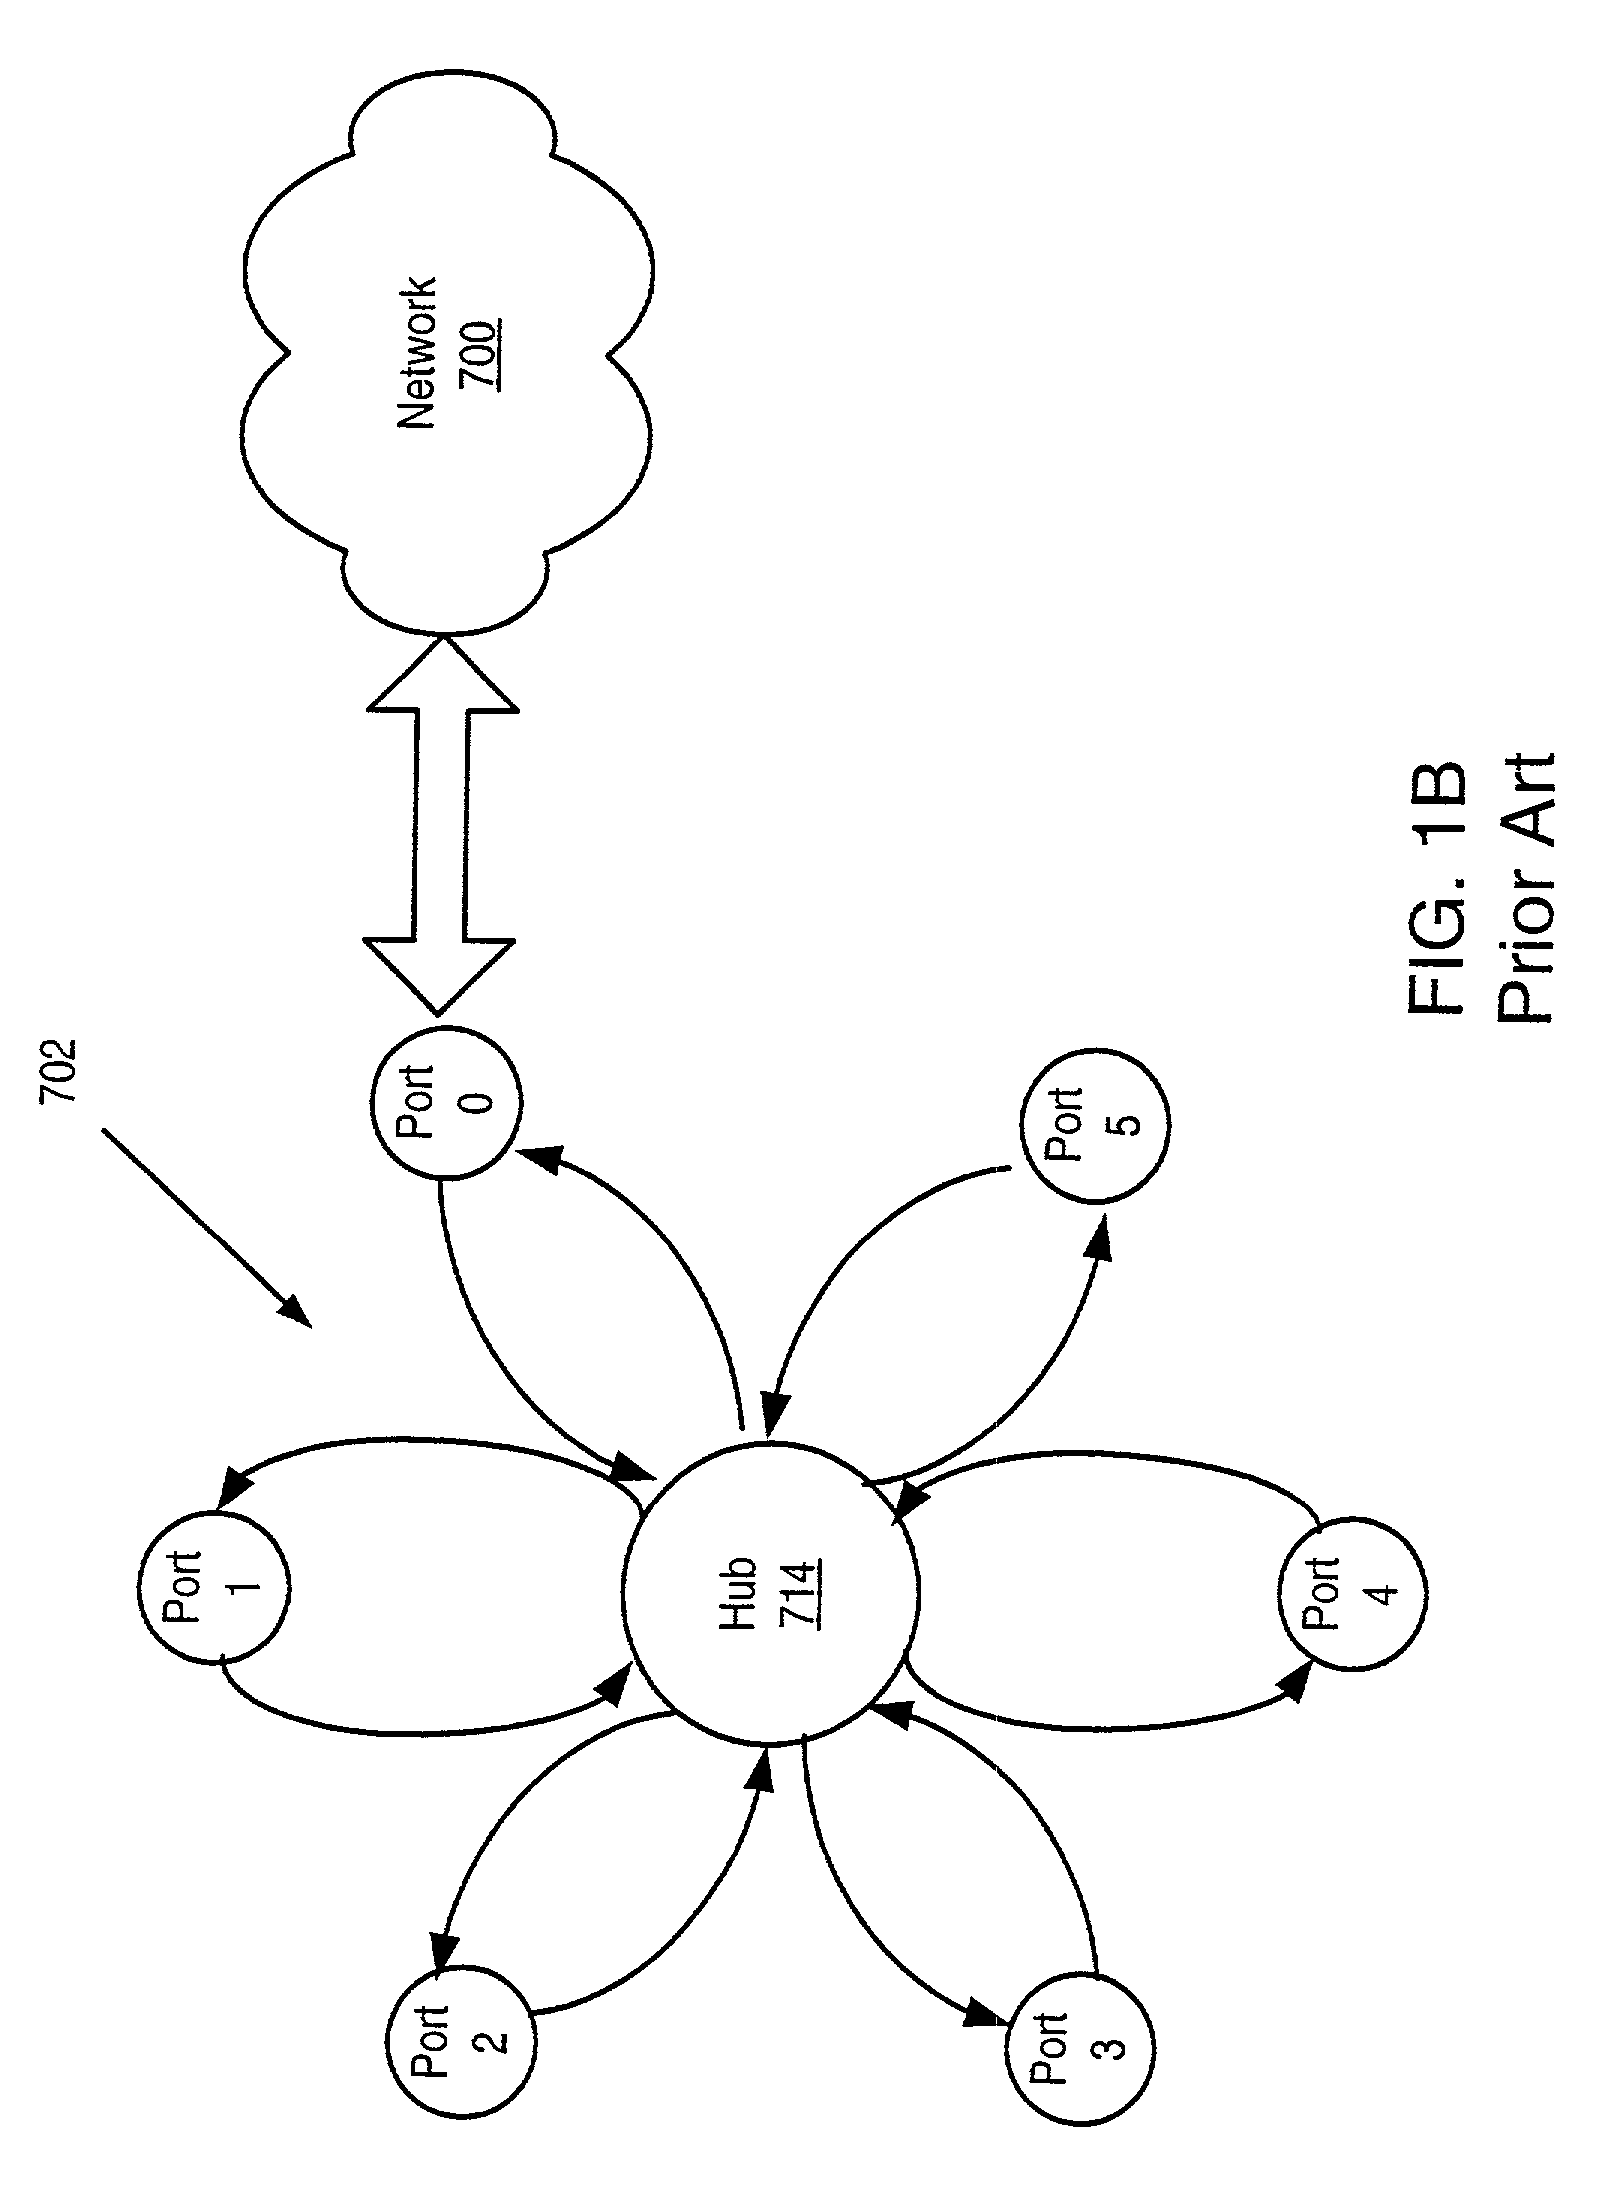 Method and apparatus for scheduling packet flow on a fibre channel arbitrated loop